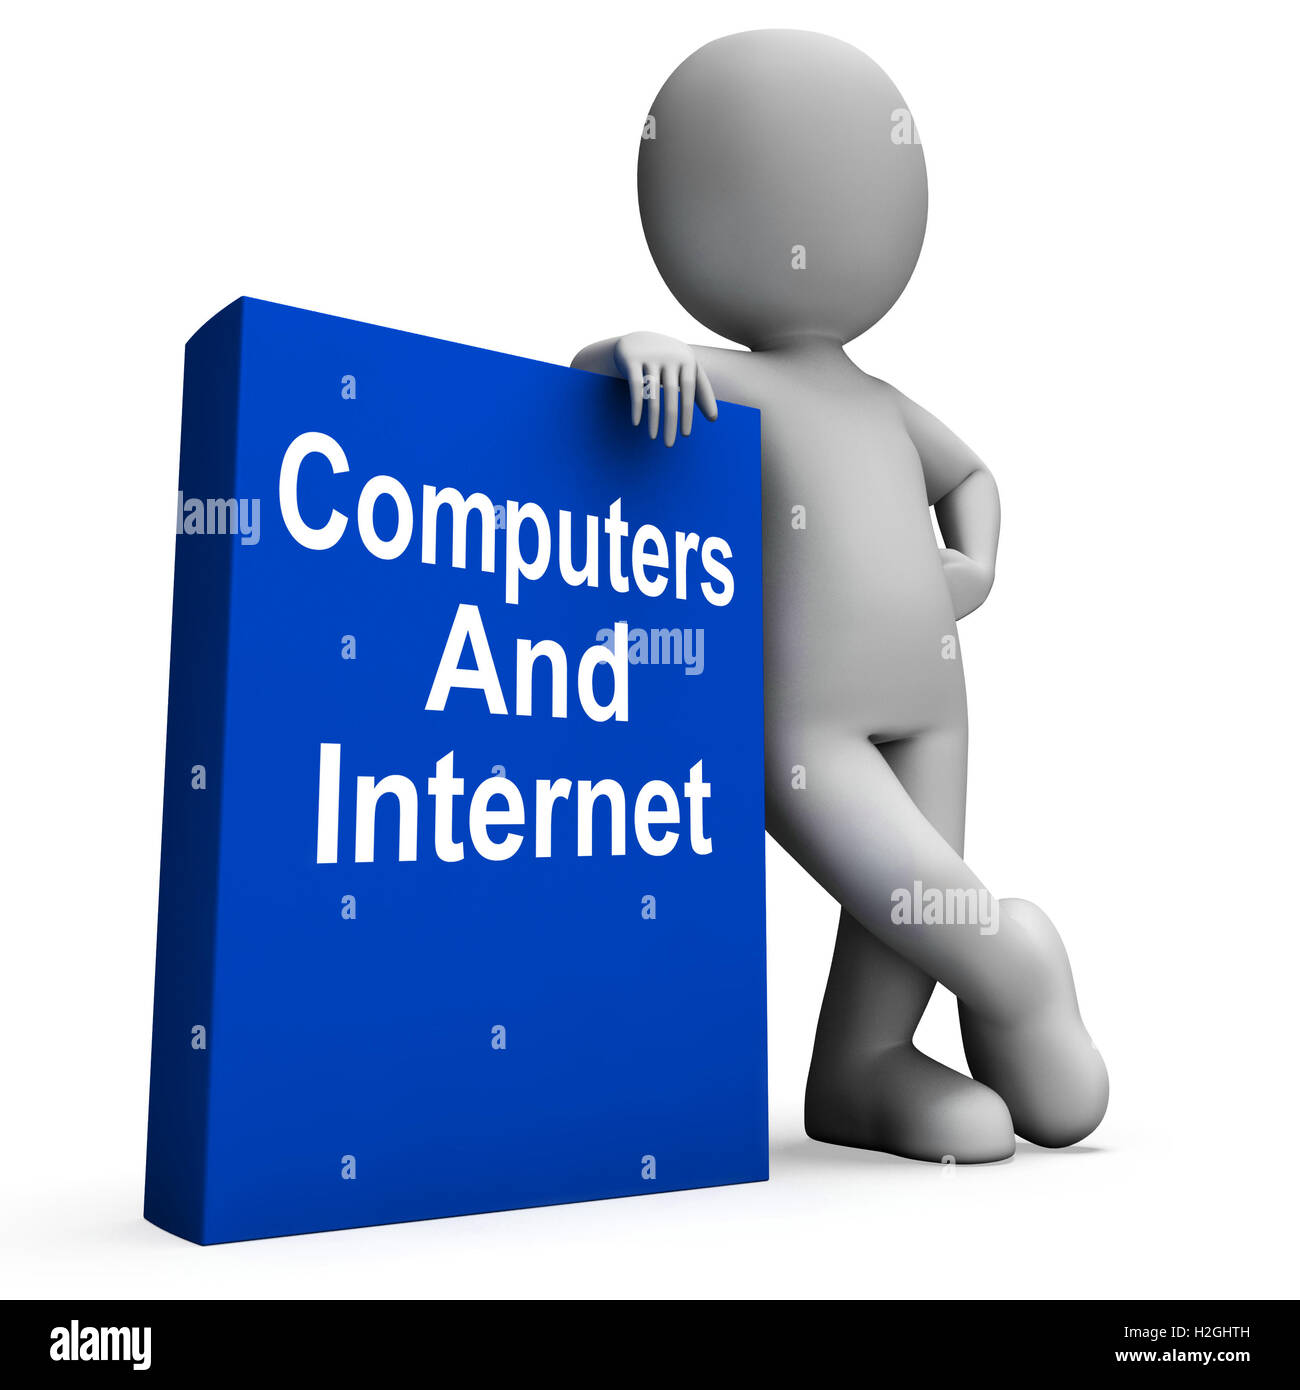 Computers And Internet Book With Character Shows Web Research Stock Photo